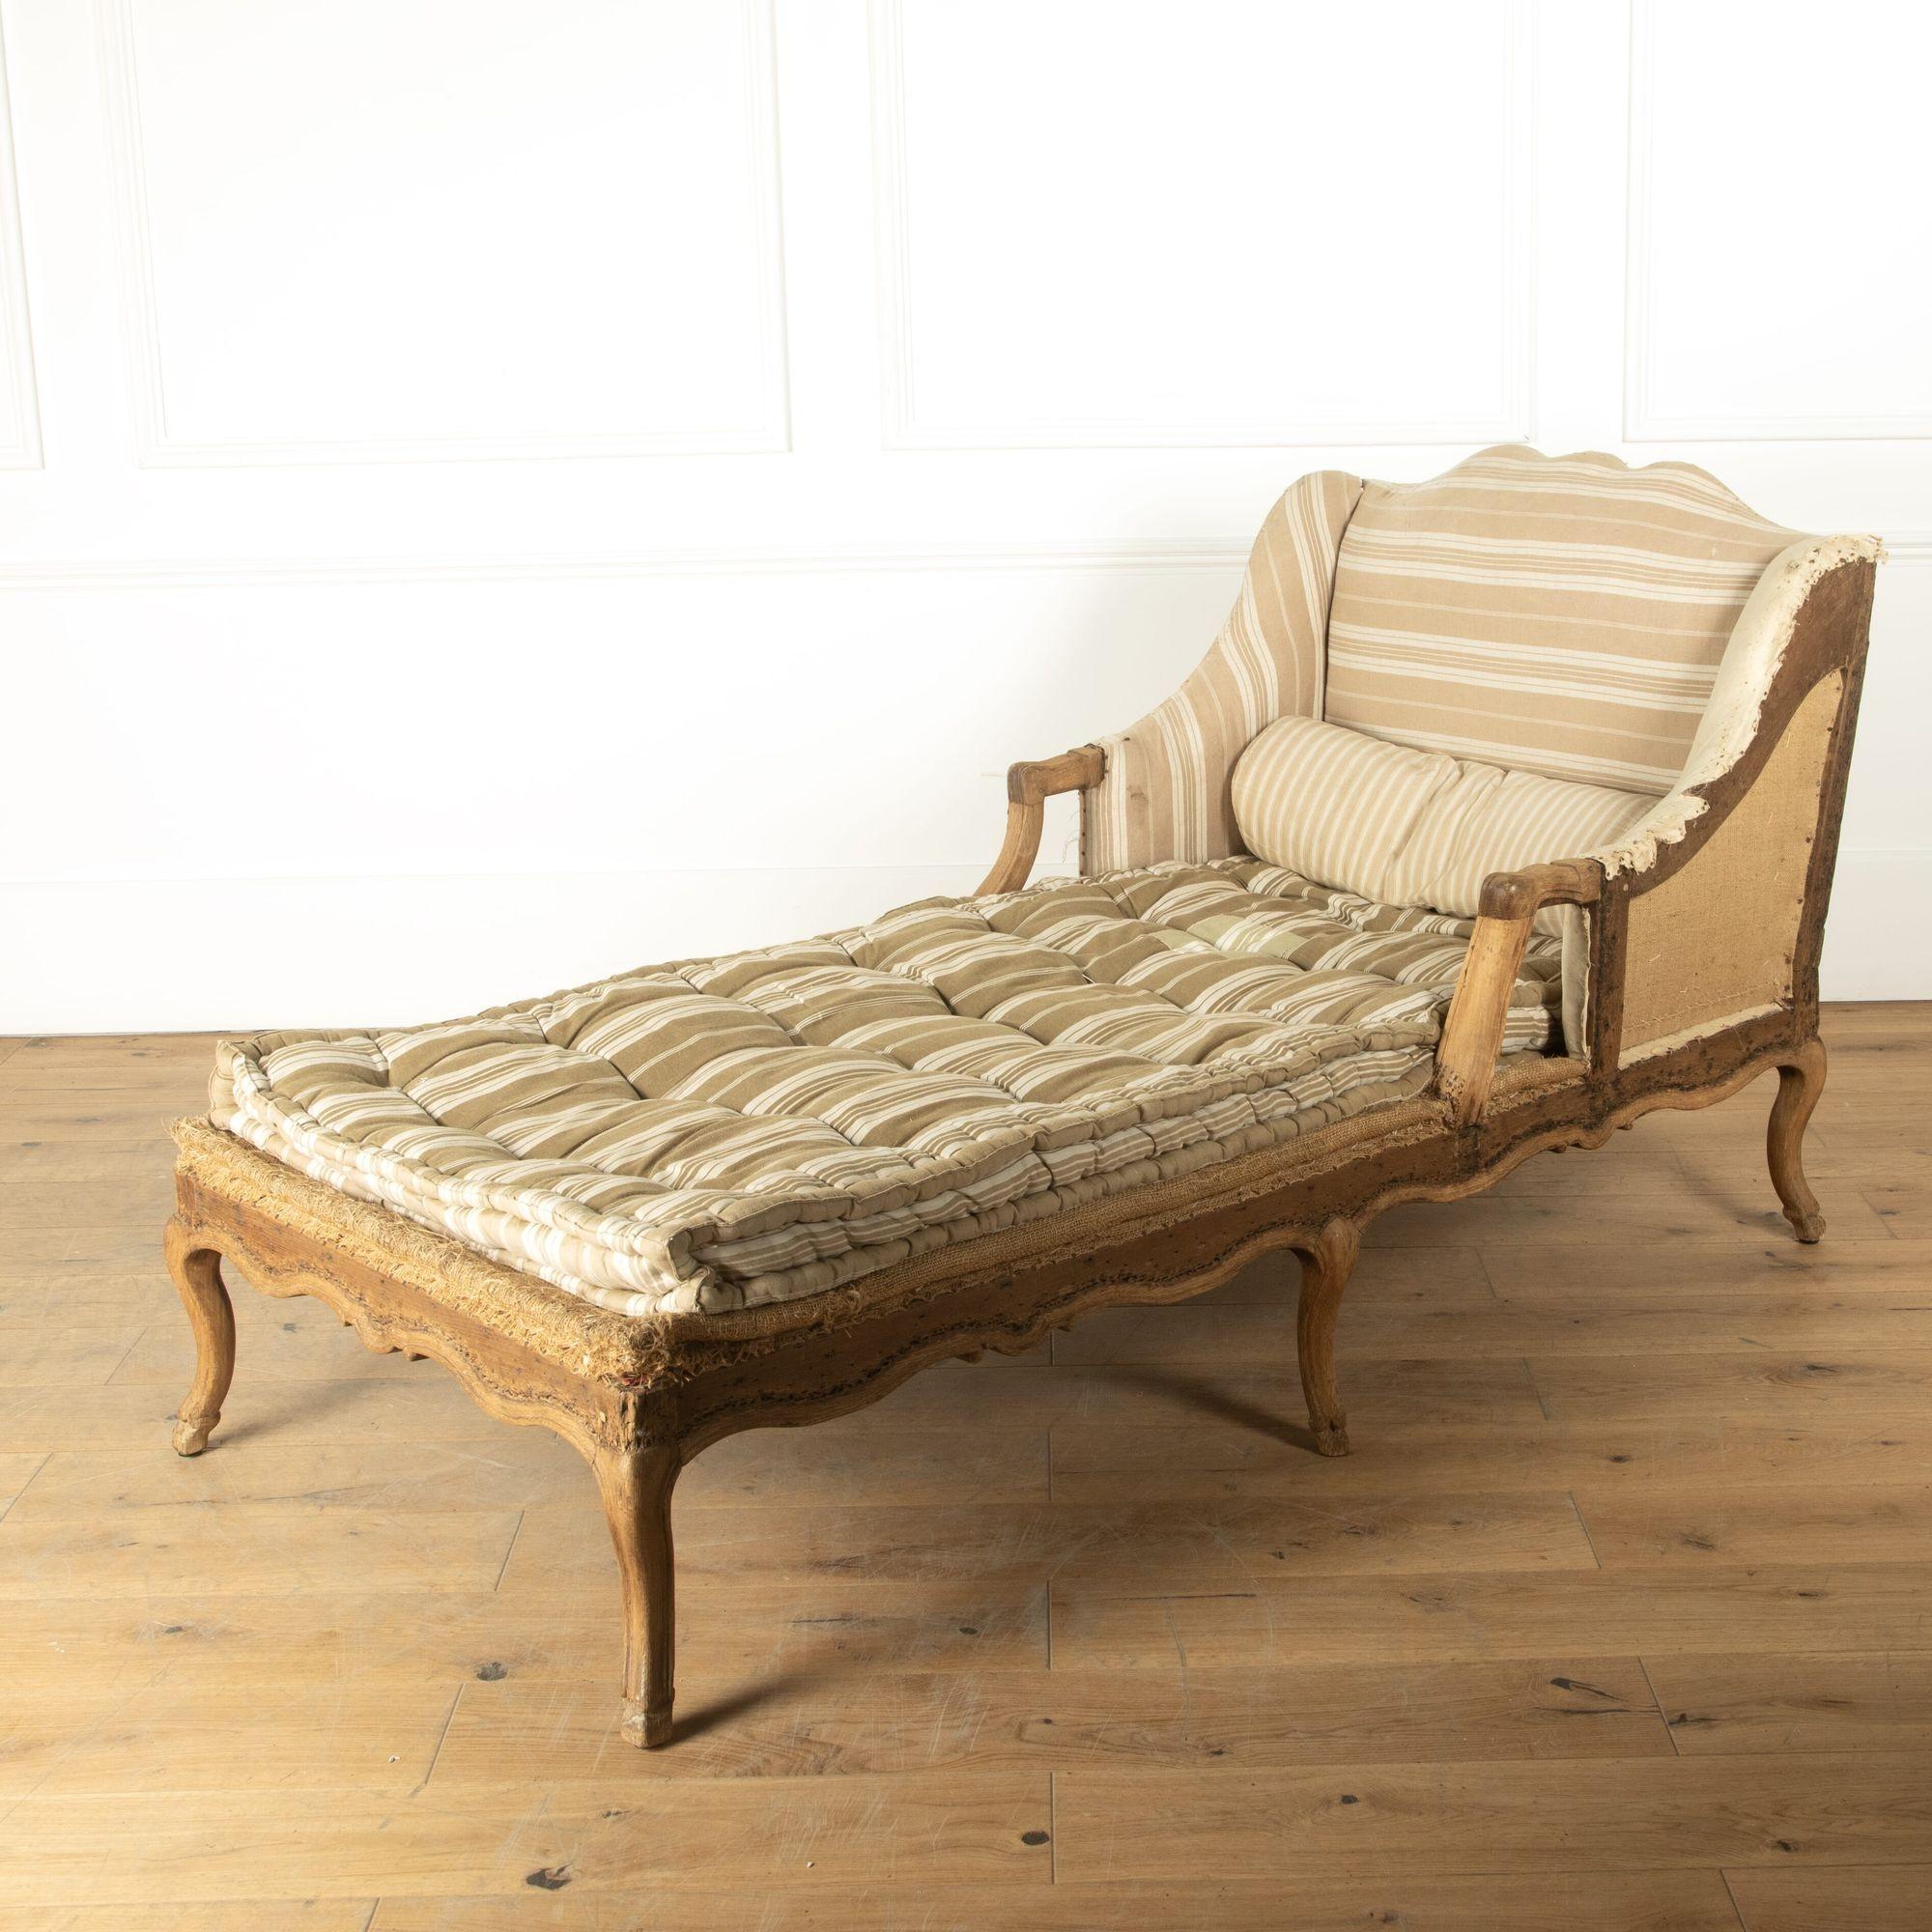 19th Century French deconstructed Louis XV style daybed of very elegant proportions, sitting on cabriole legs with hoof feet.